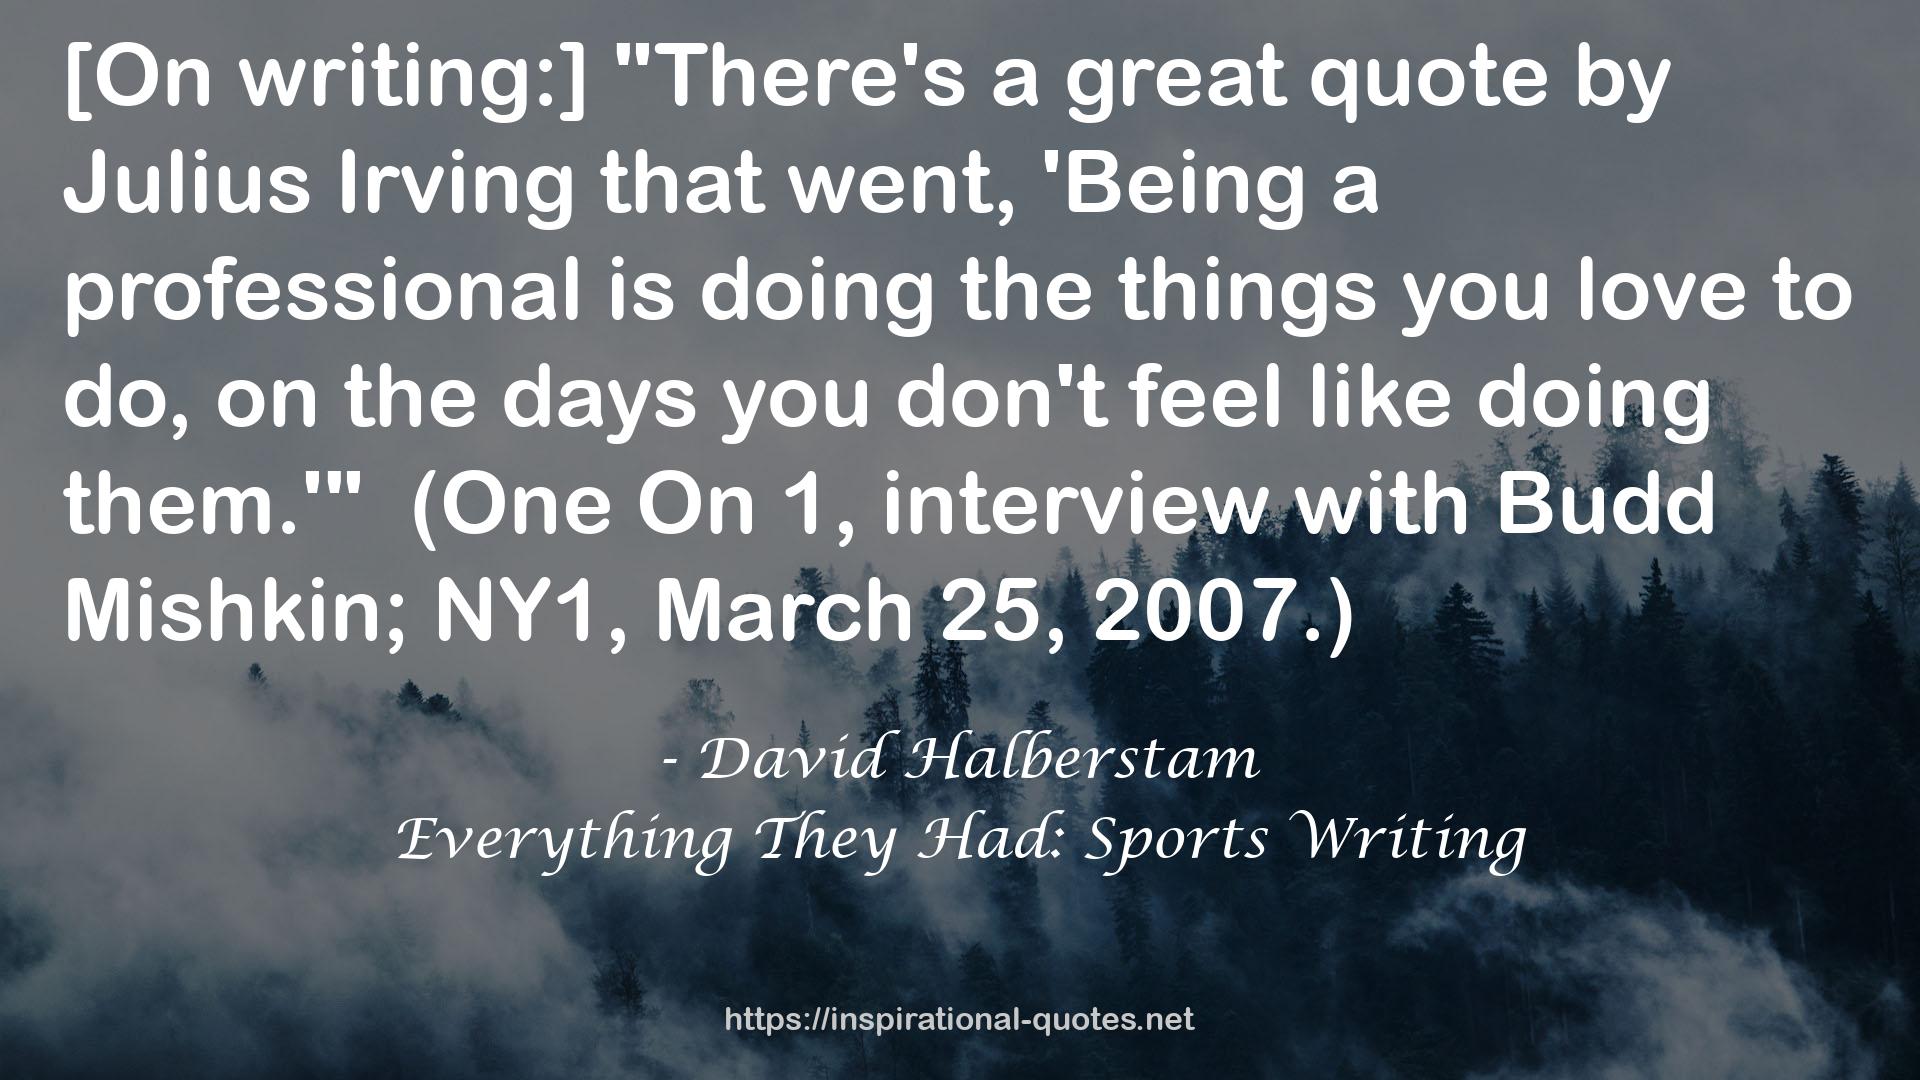 Everything They Had: Sports Writing QUOTES